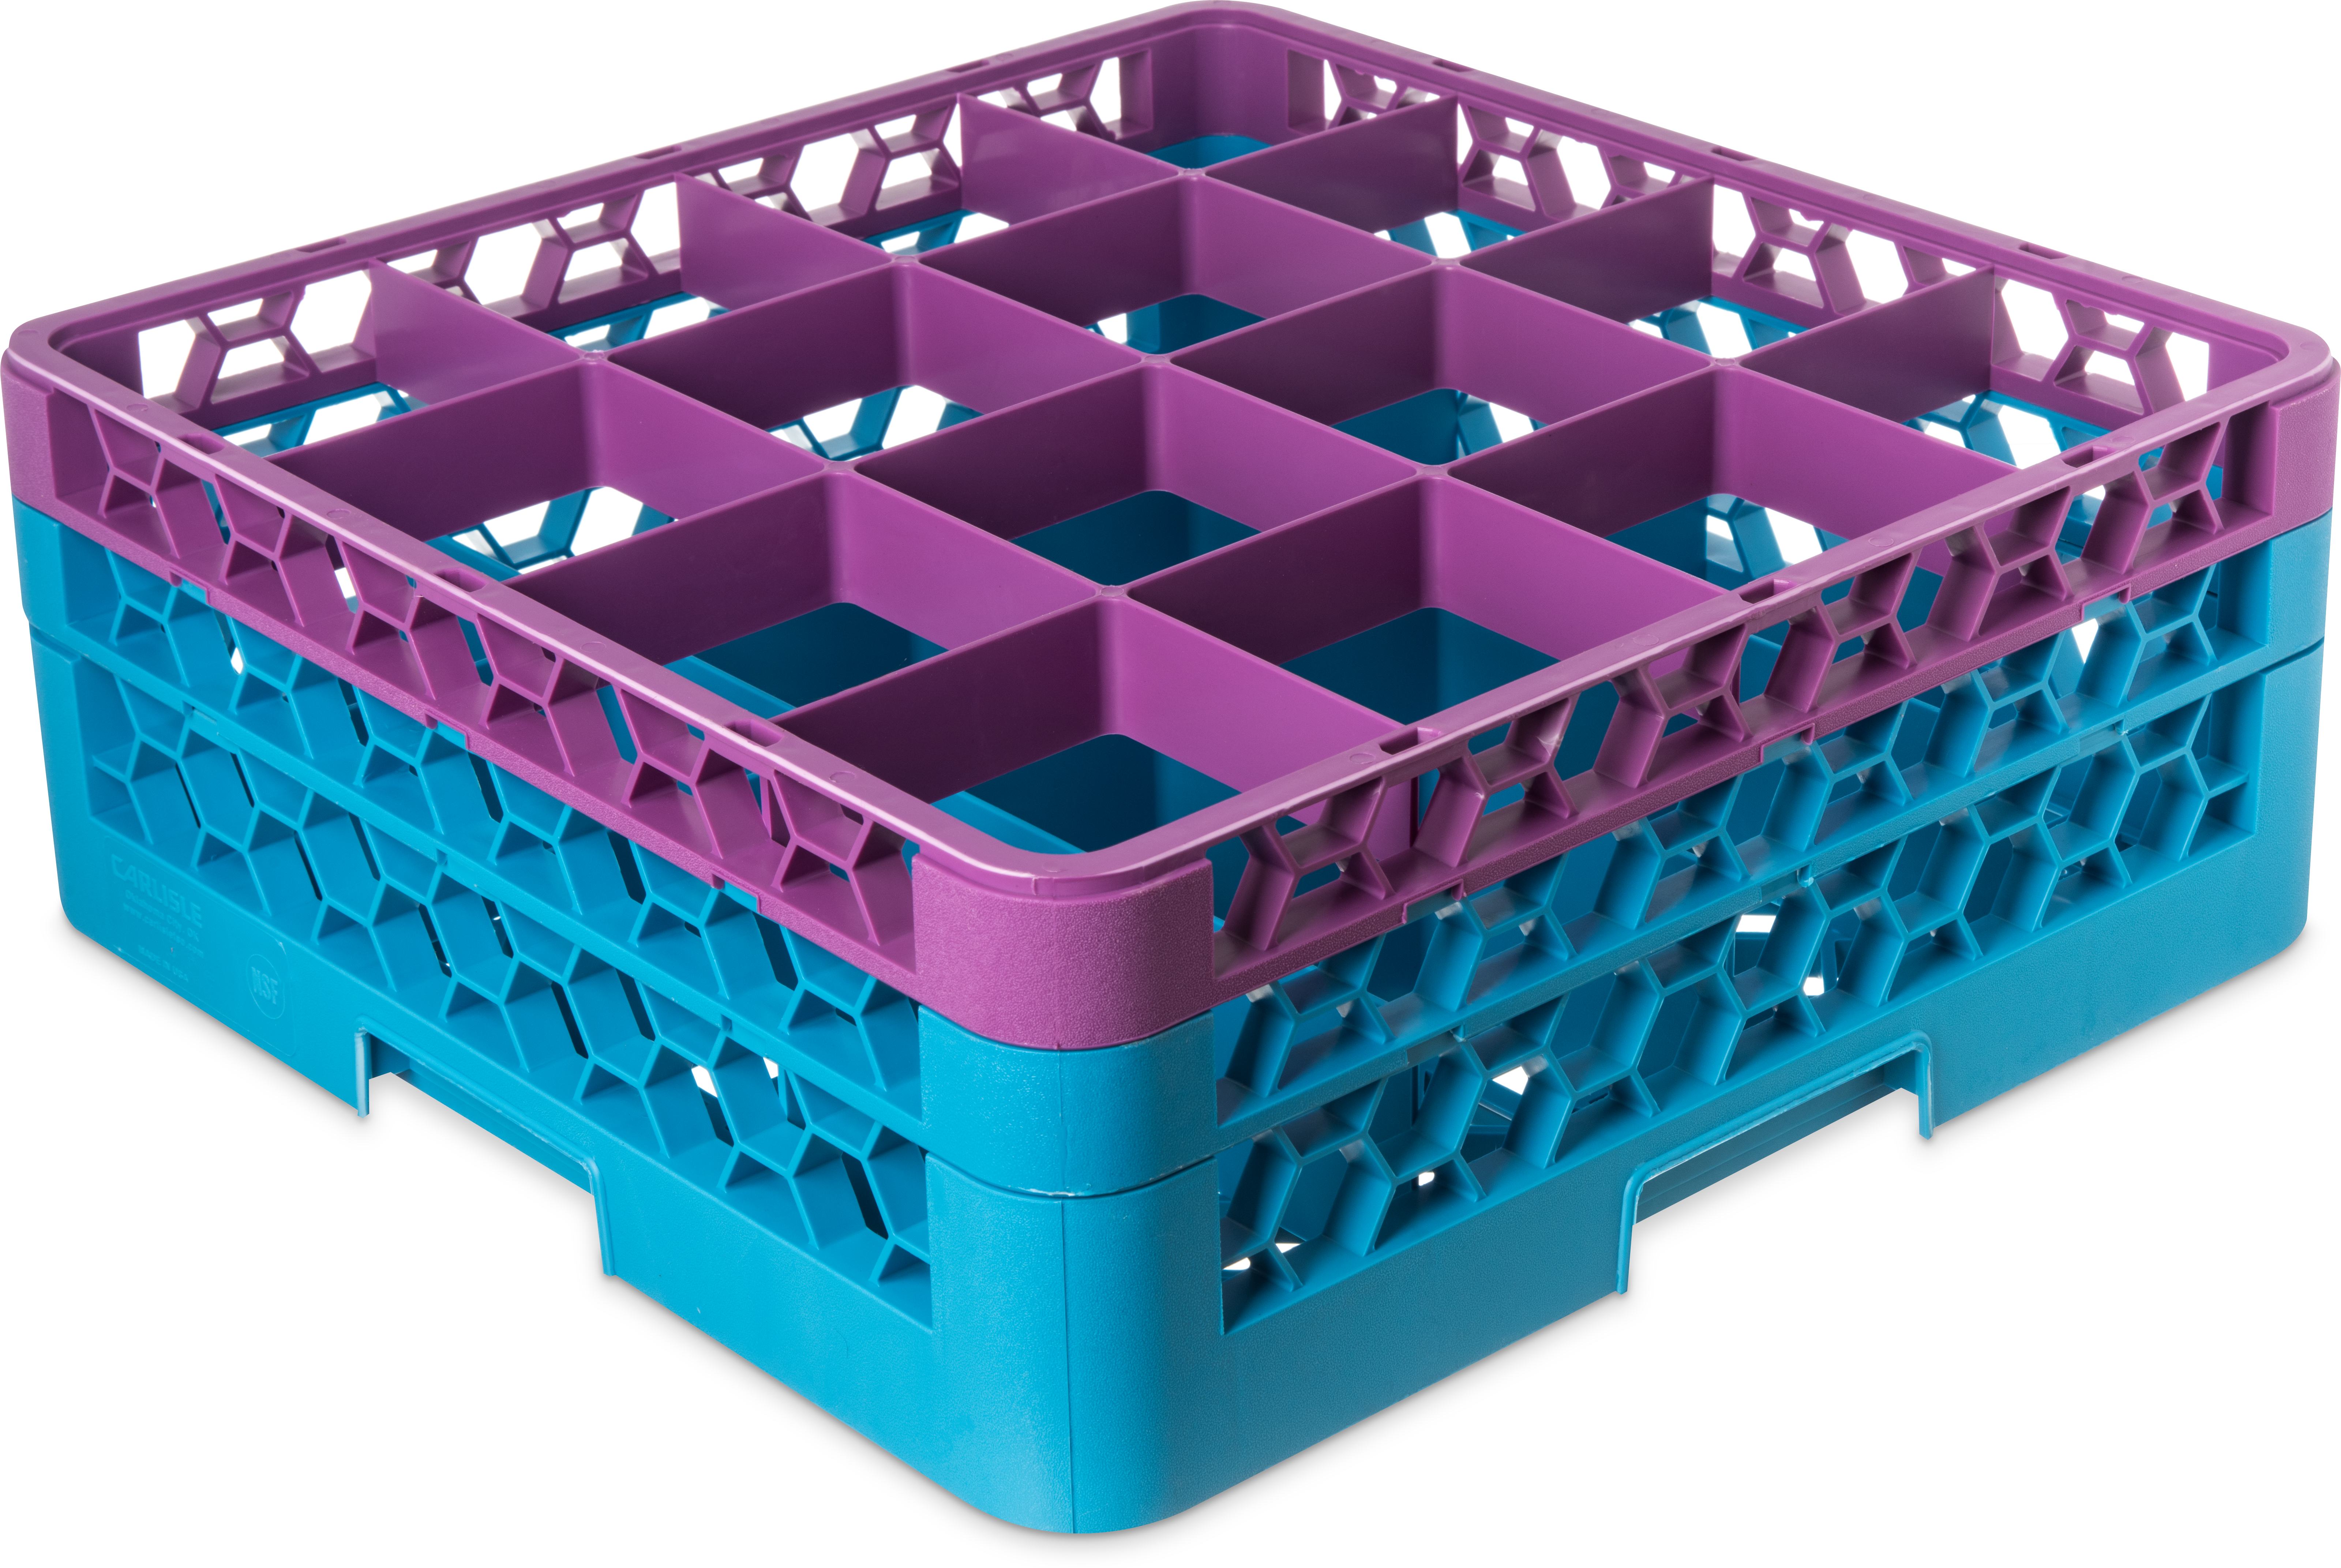 OptiClean 16 Compartment Glass Rack with 2 Extenders 7.12 - Lavender-Carlisle Blue